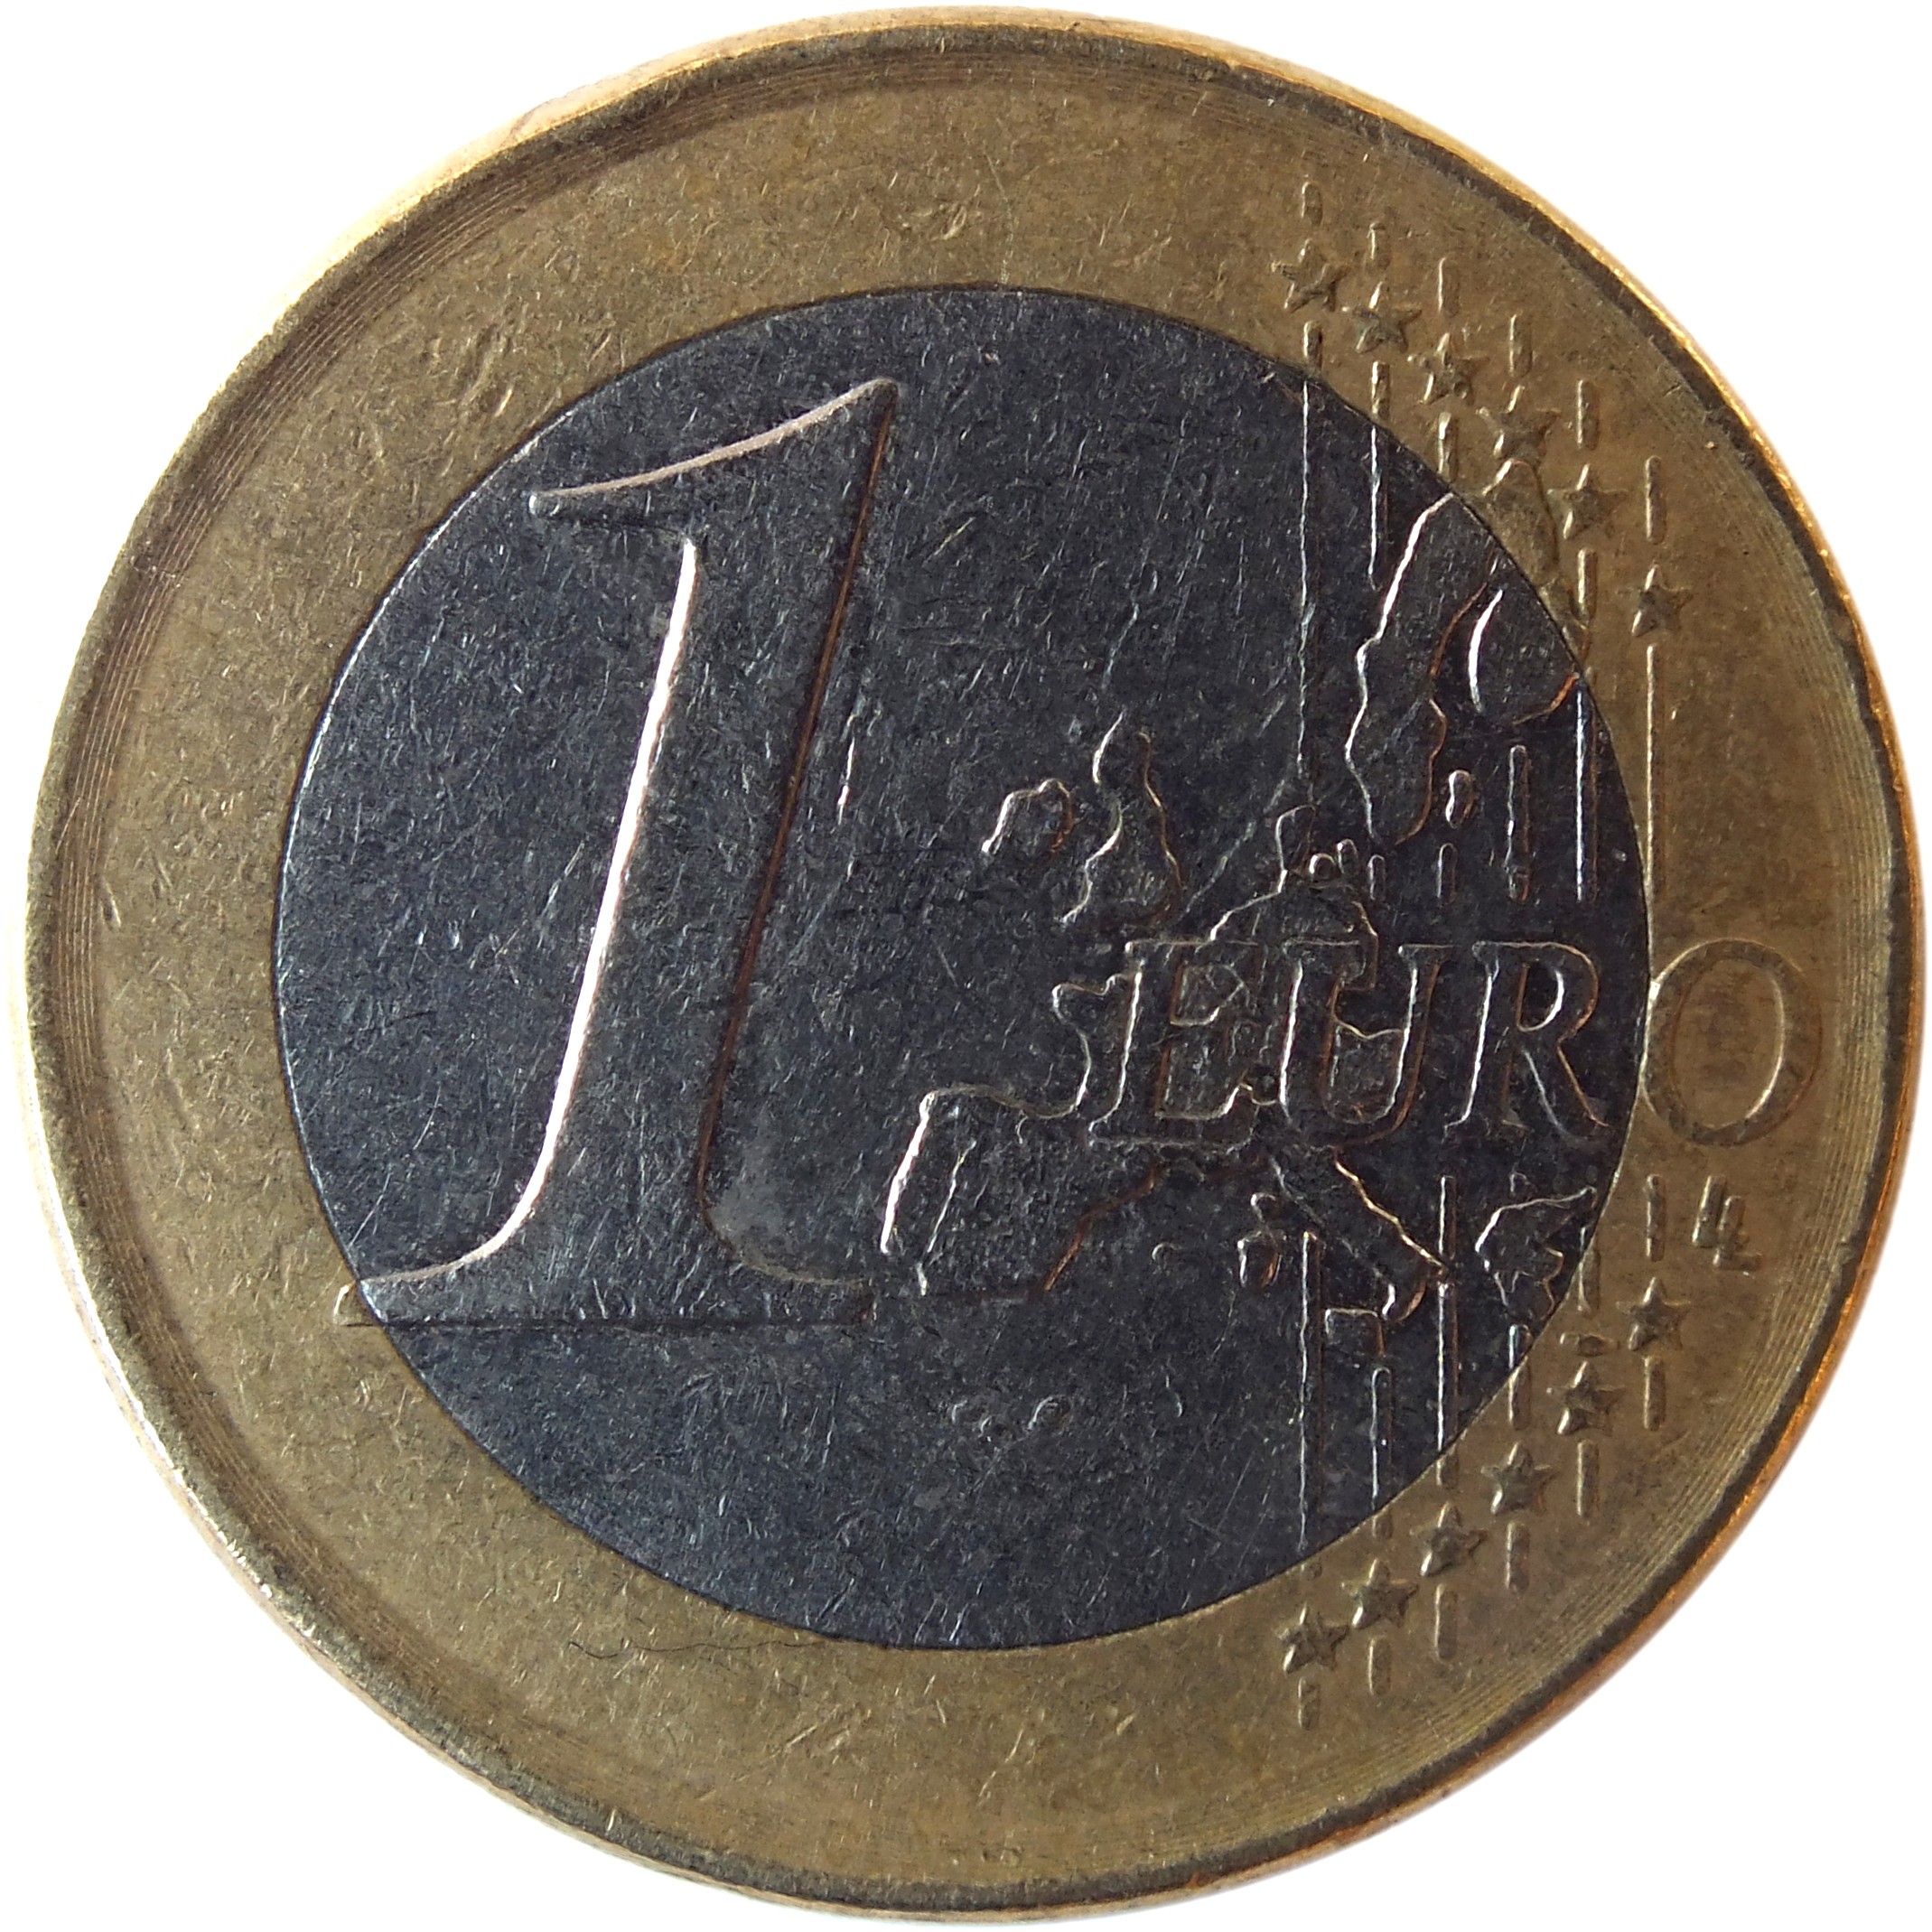 1 Euro - Juan Carlos I - 1'st Map; 1'st Type (1999-2006) Spain KM# 1046 -  CoinsBook